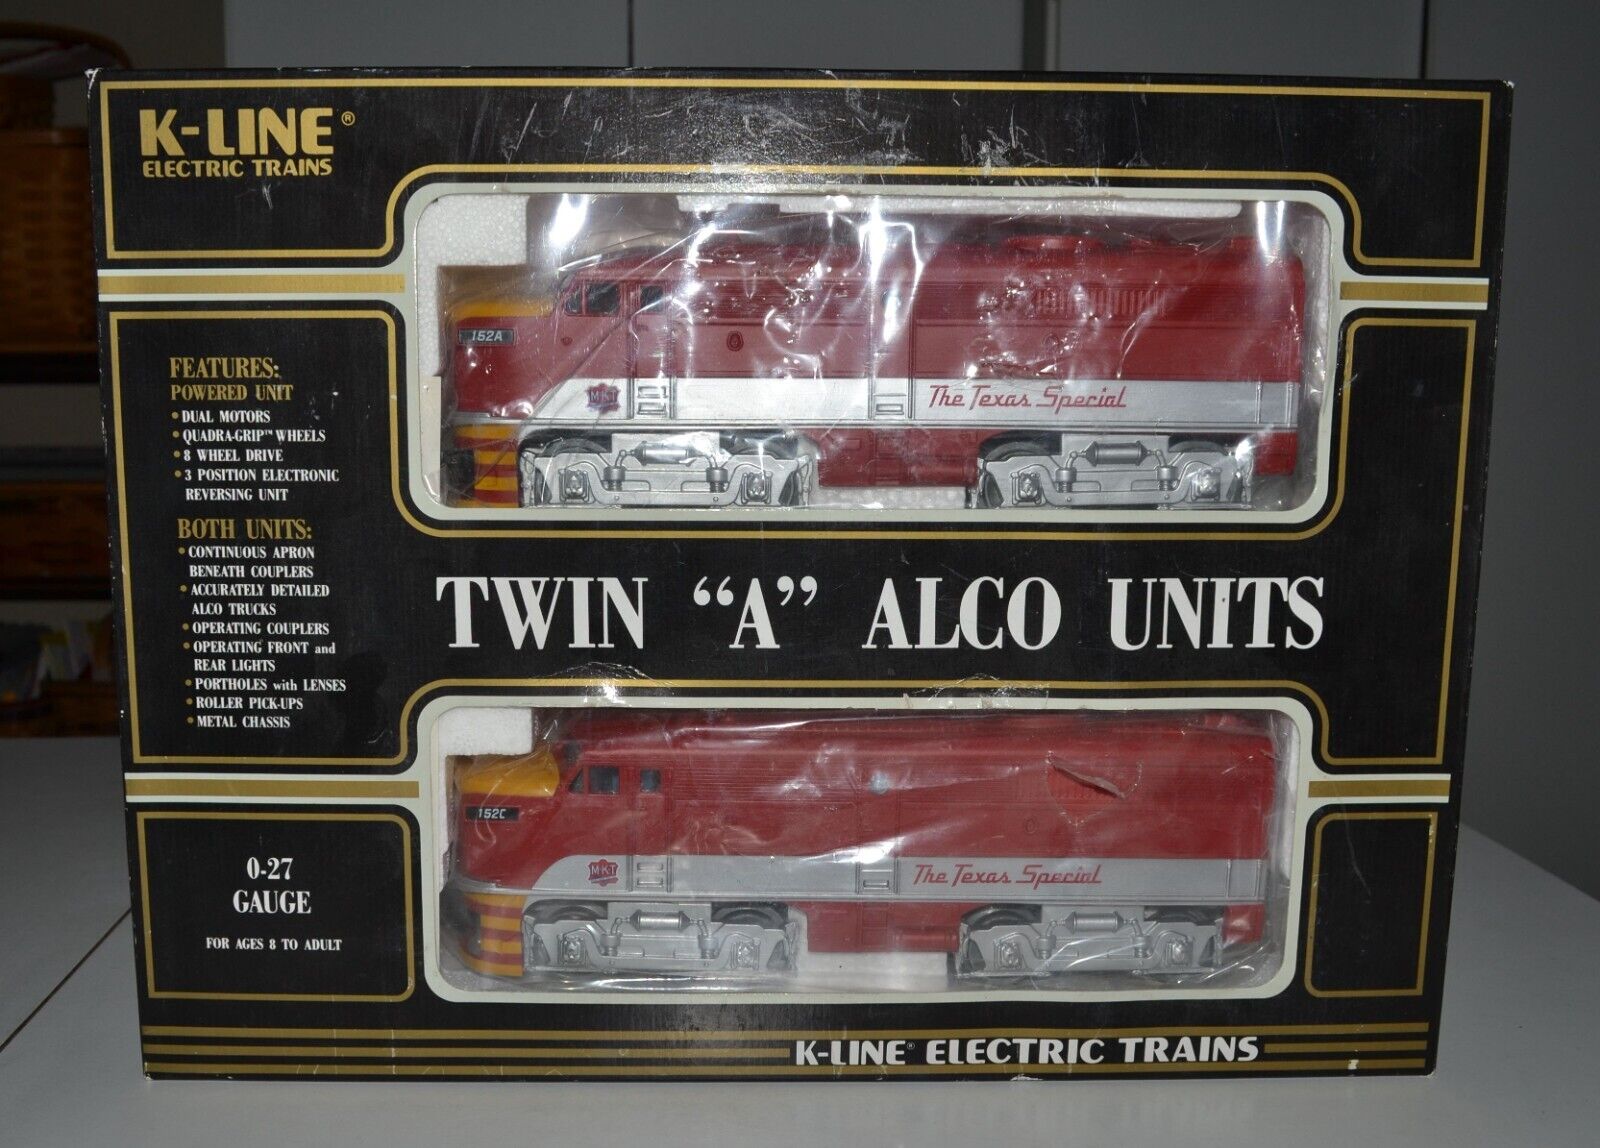 K-LINE NEW 0-27 TEXAS SPECIAL TWIN ALCO AA DIESEL Locomotive UNITS - Excellent